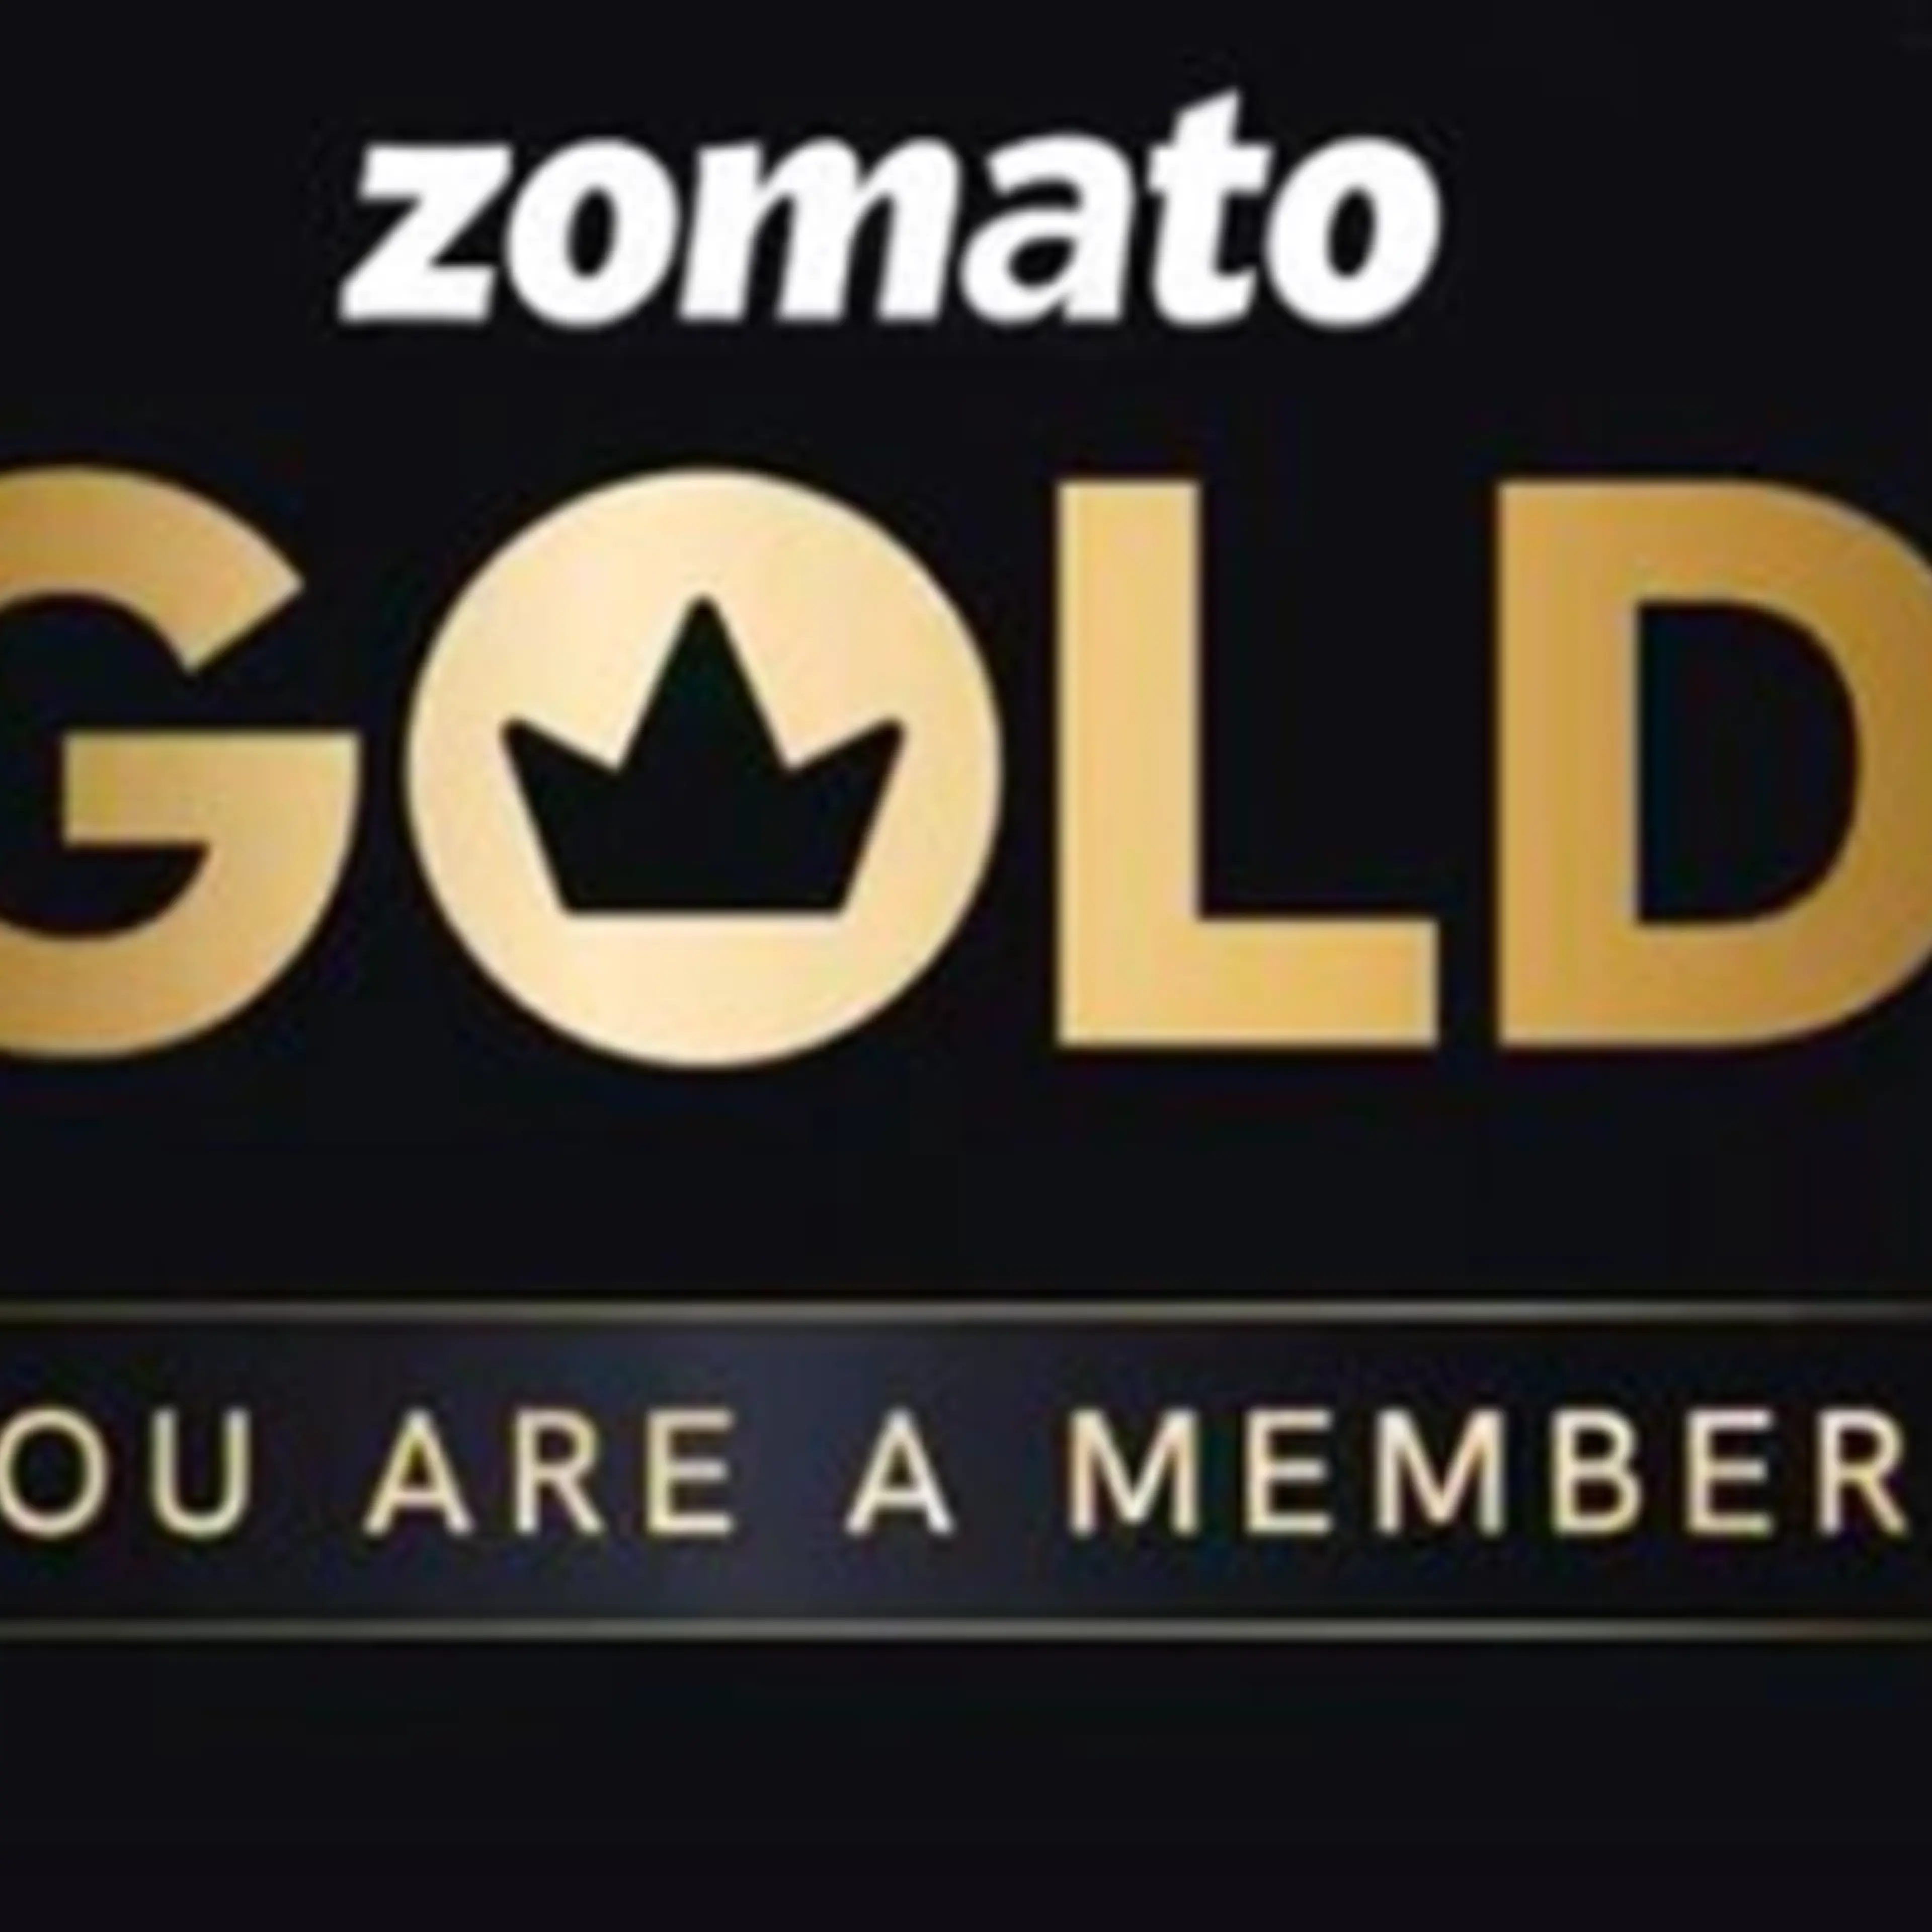 Less Features at Lesser Cost: Zomato's Offer of Gold at just Rs.30!